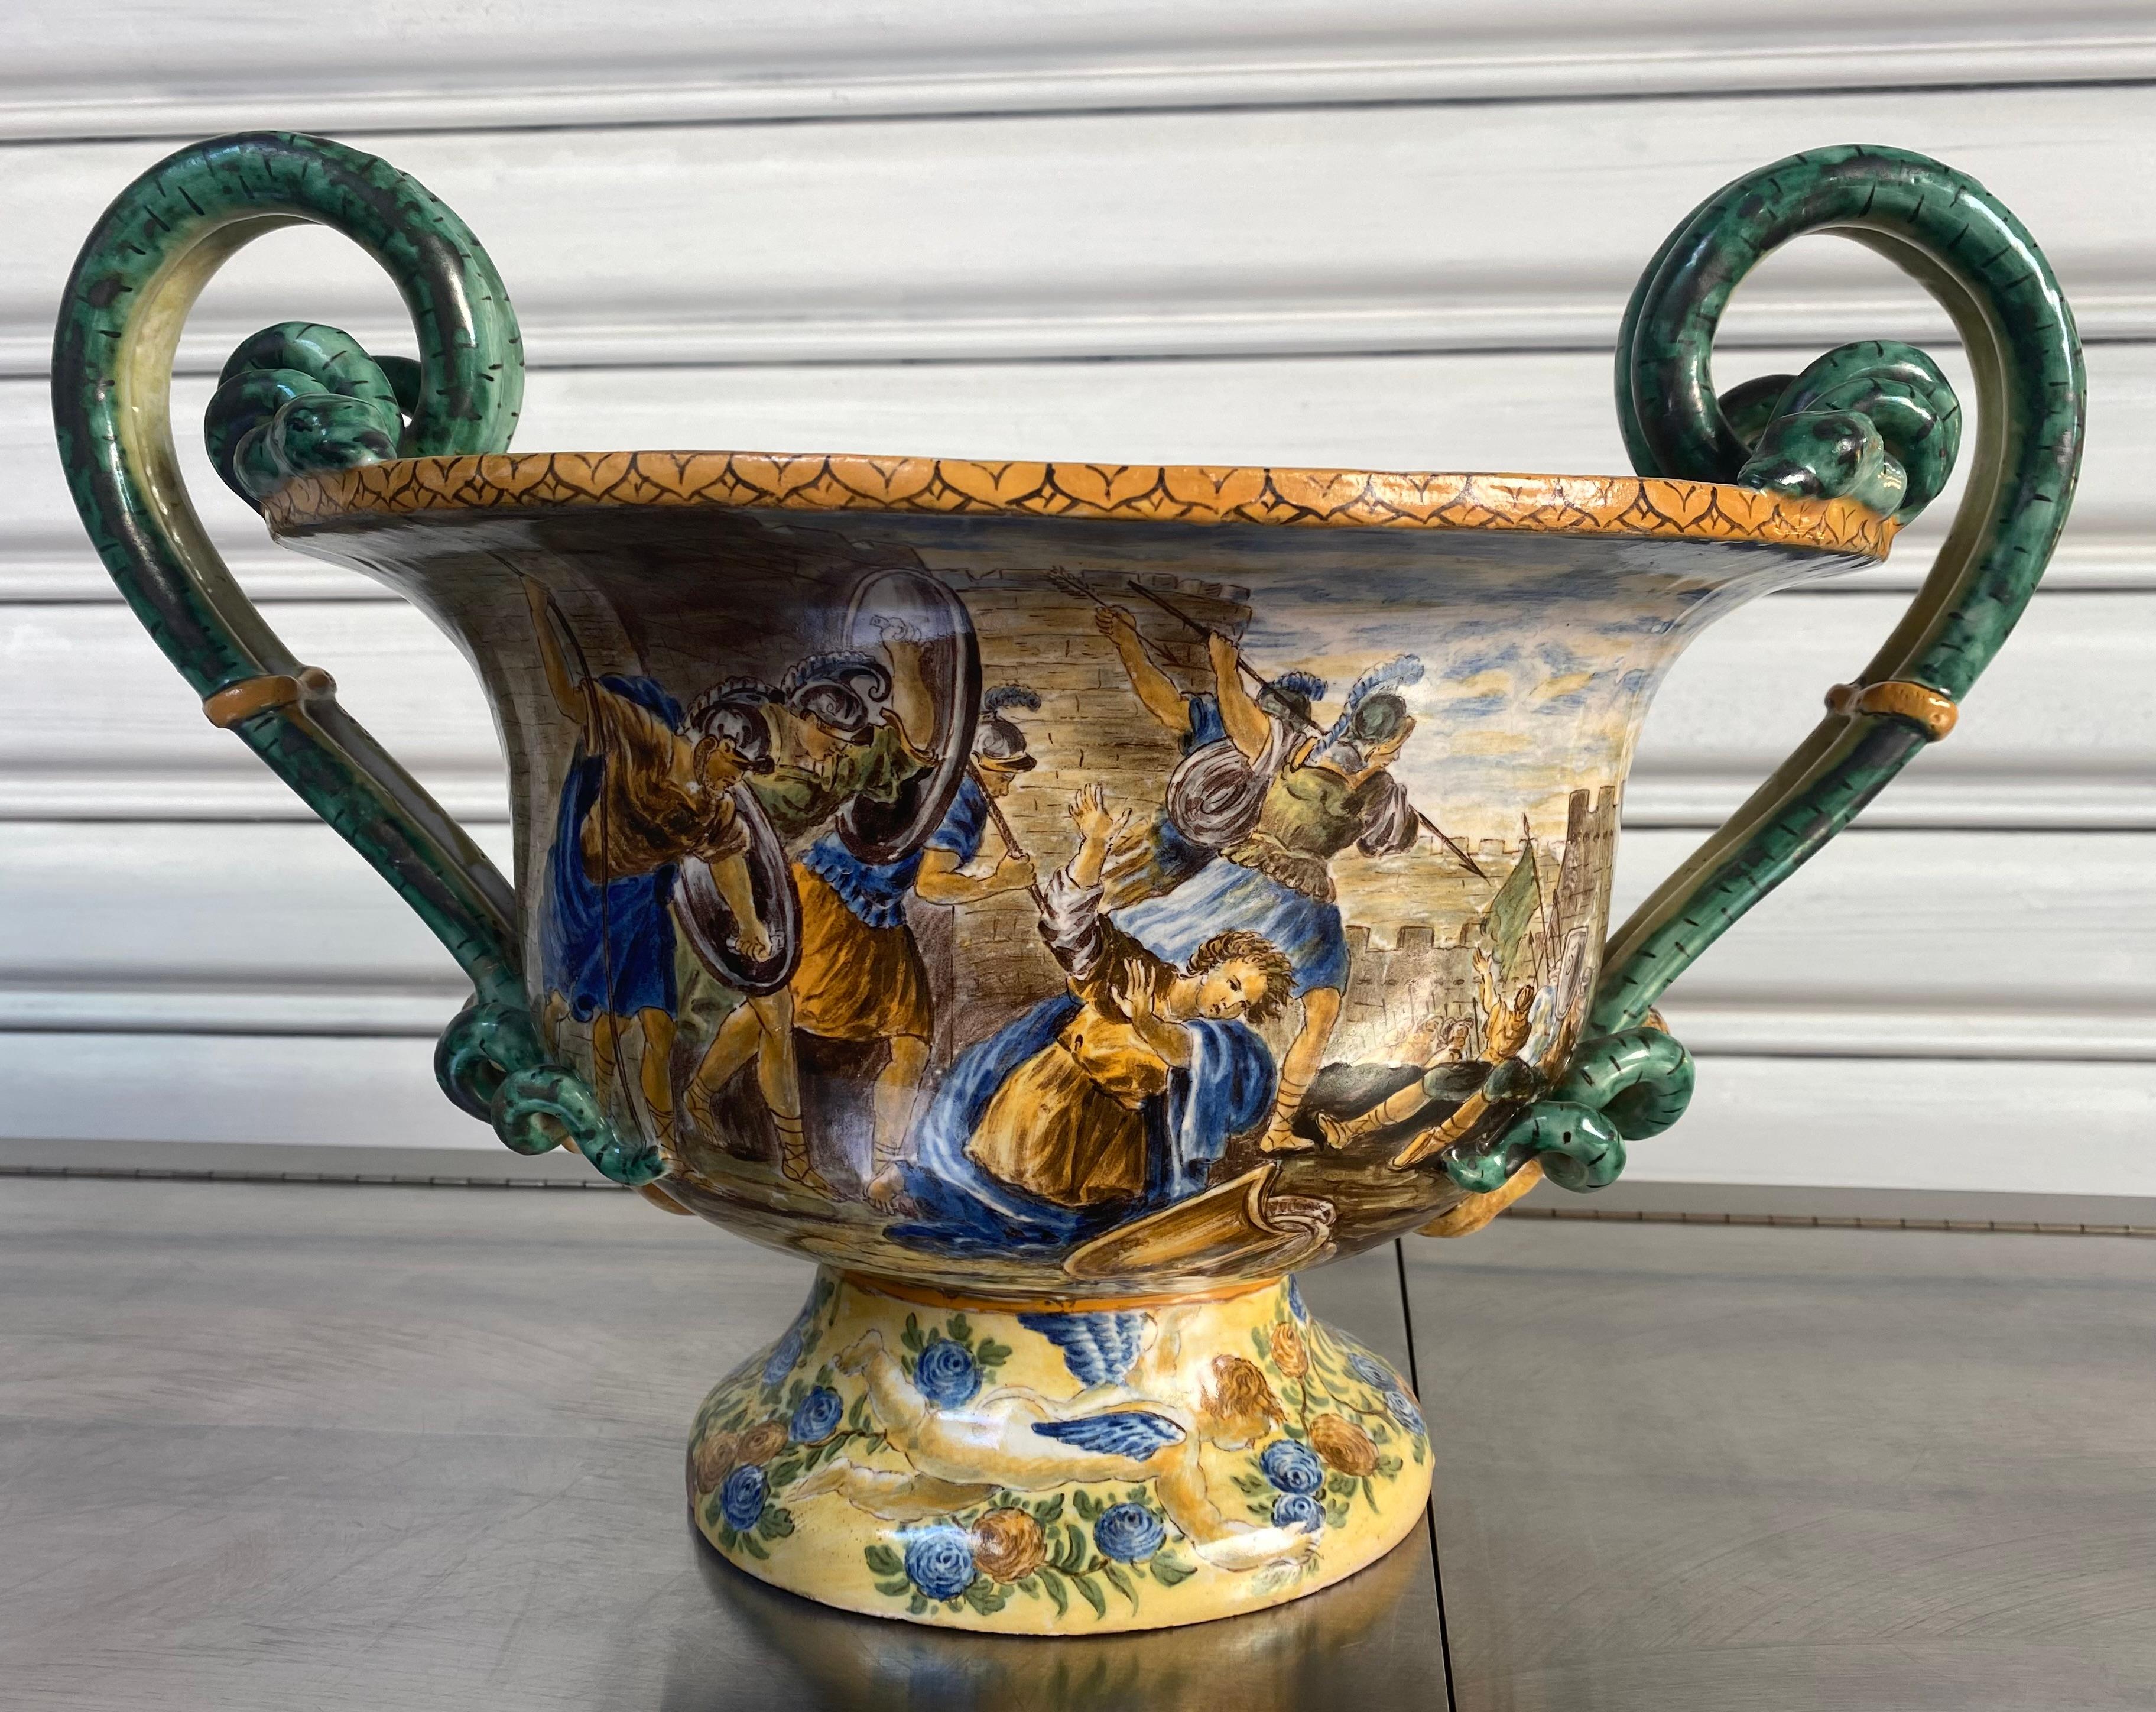 Majolica vase 
Provenance Amalfi - Italy 
Earthenware
Circa early 20th century
Measures: Length 50cm x width 30cm x height 32cm.
A majolica is the generic name which designates, in French, an earthenware, either Hispano-Moorish, or Italian of